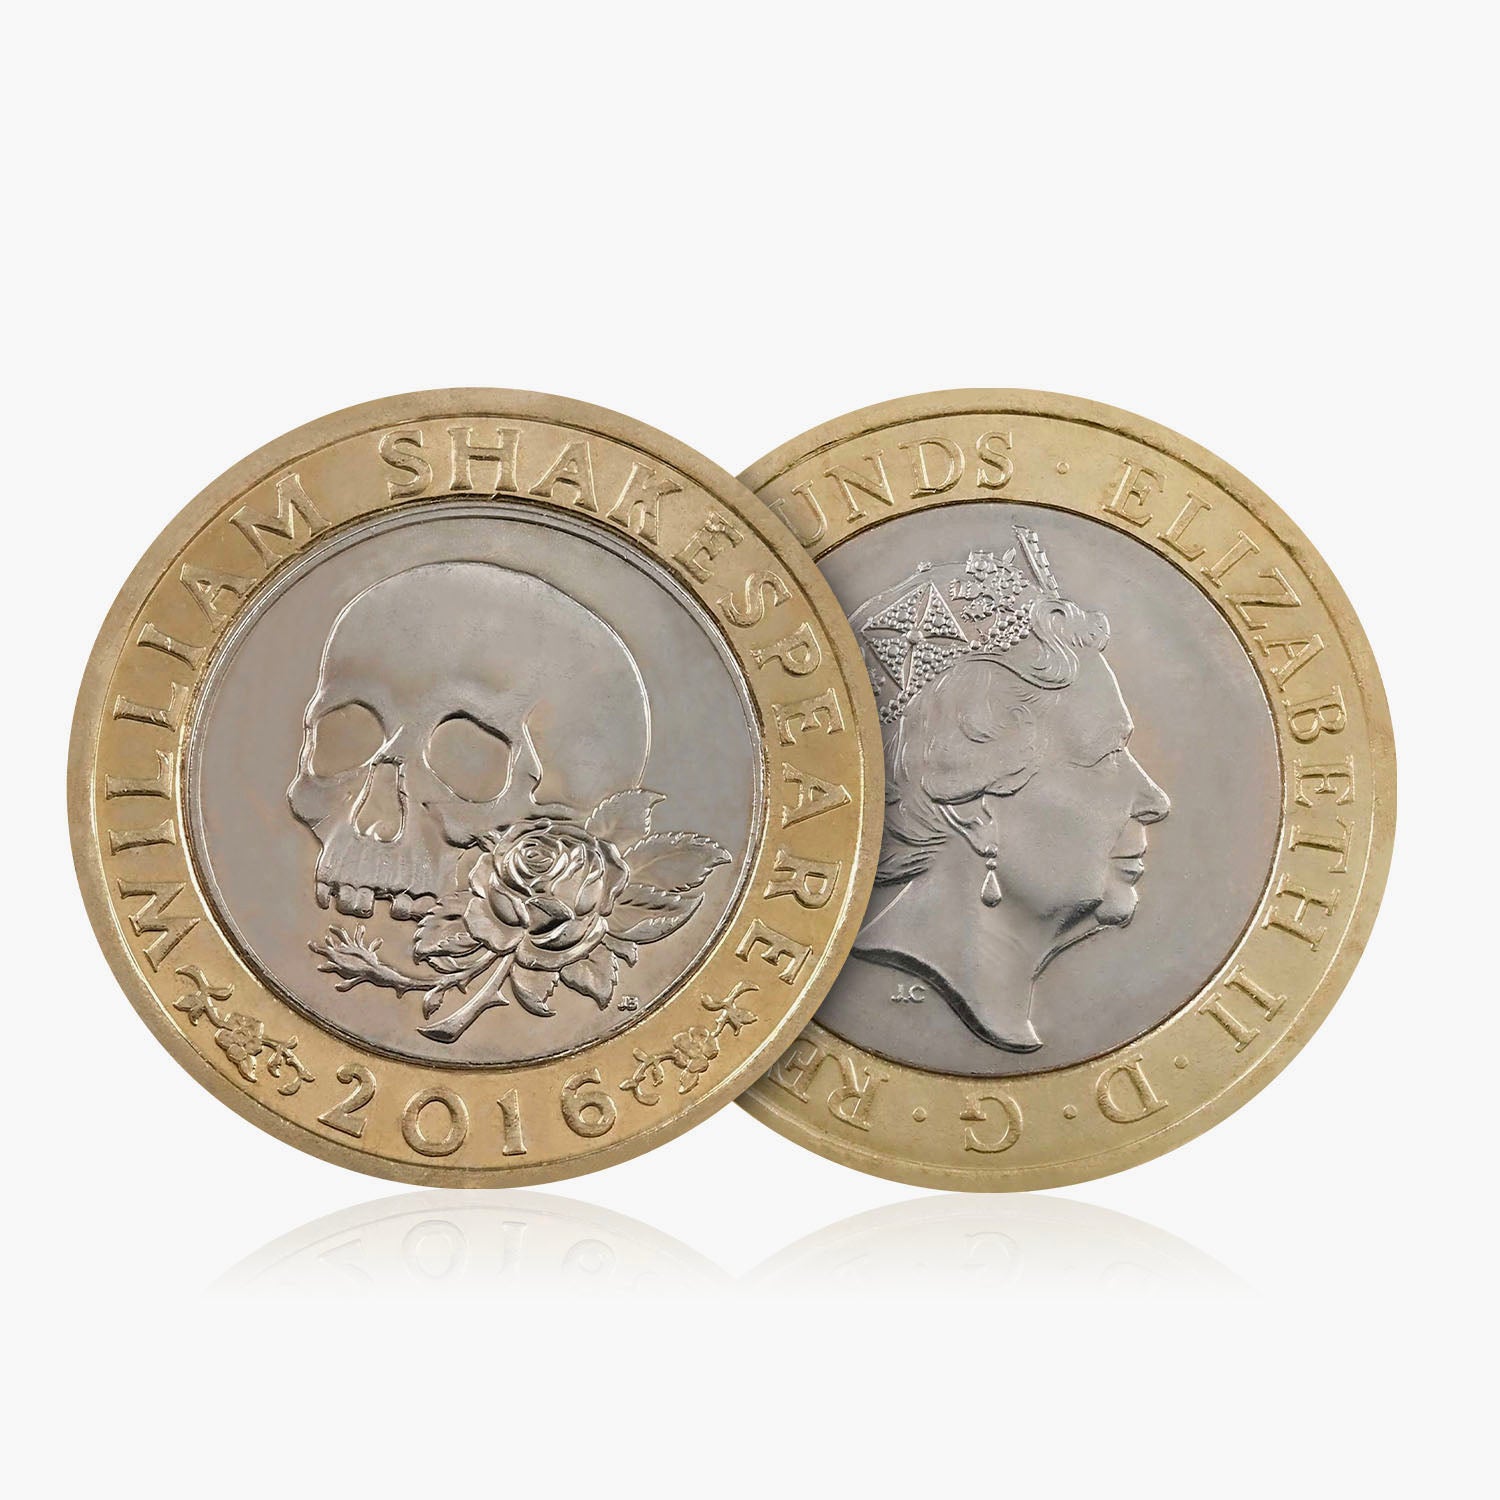 2016 Circulated Shakespeare Tragedies UK £2 Coin